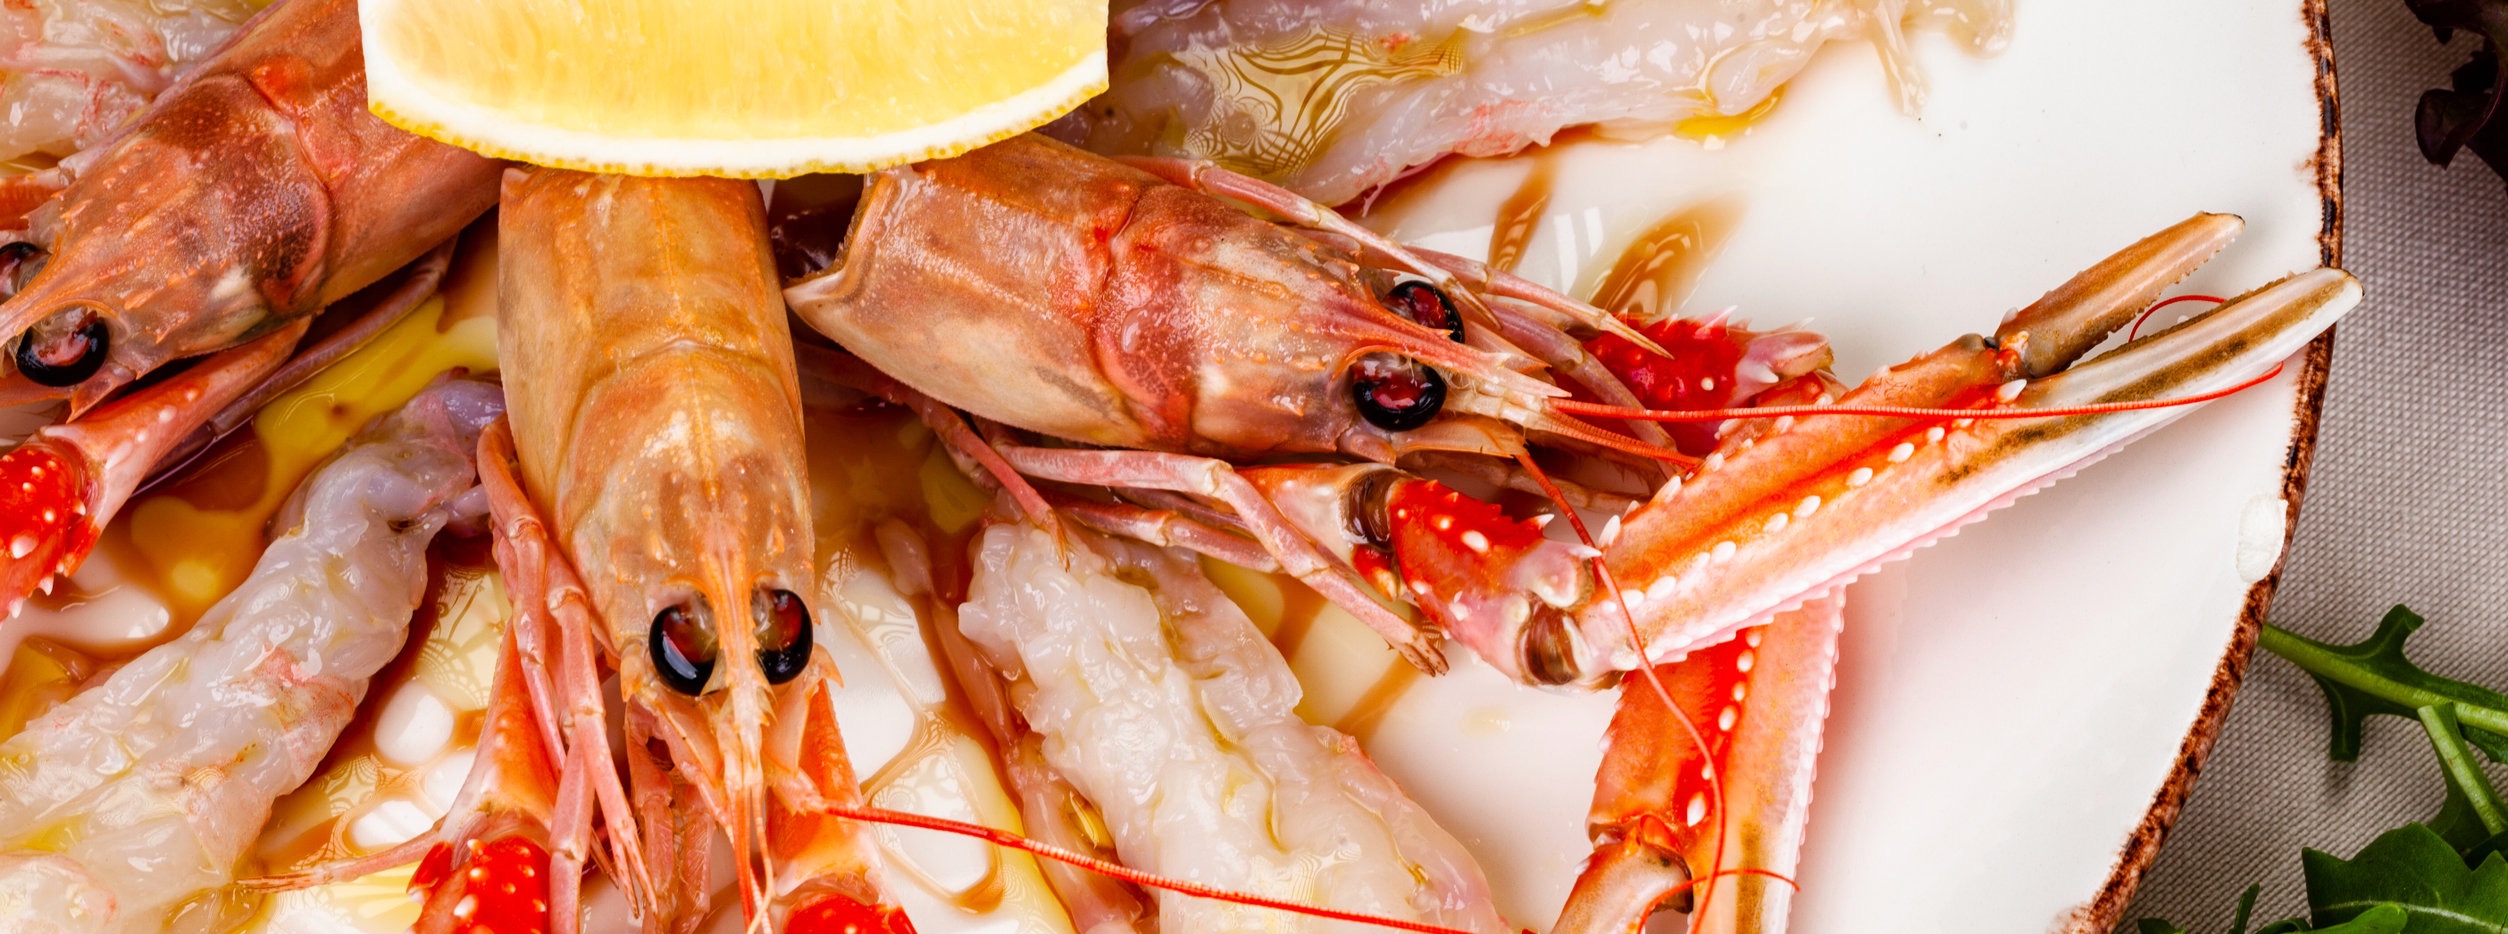 Seafood. Langoustine, scampi or Norway lobster with lemon on white plate.